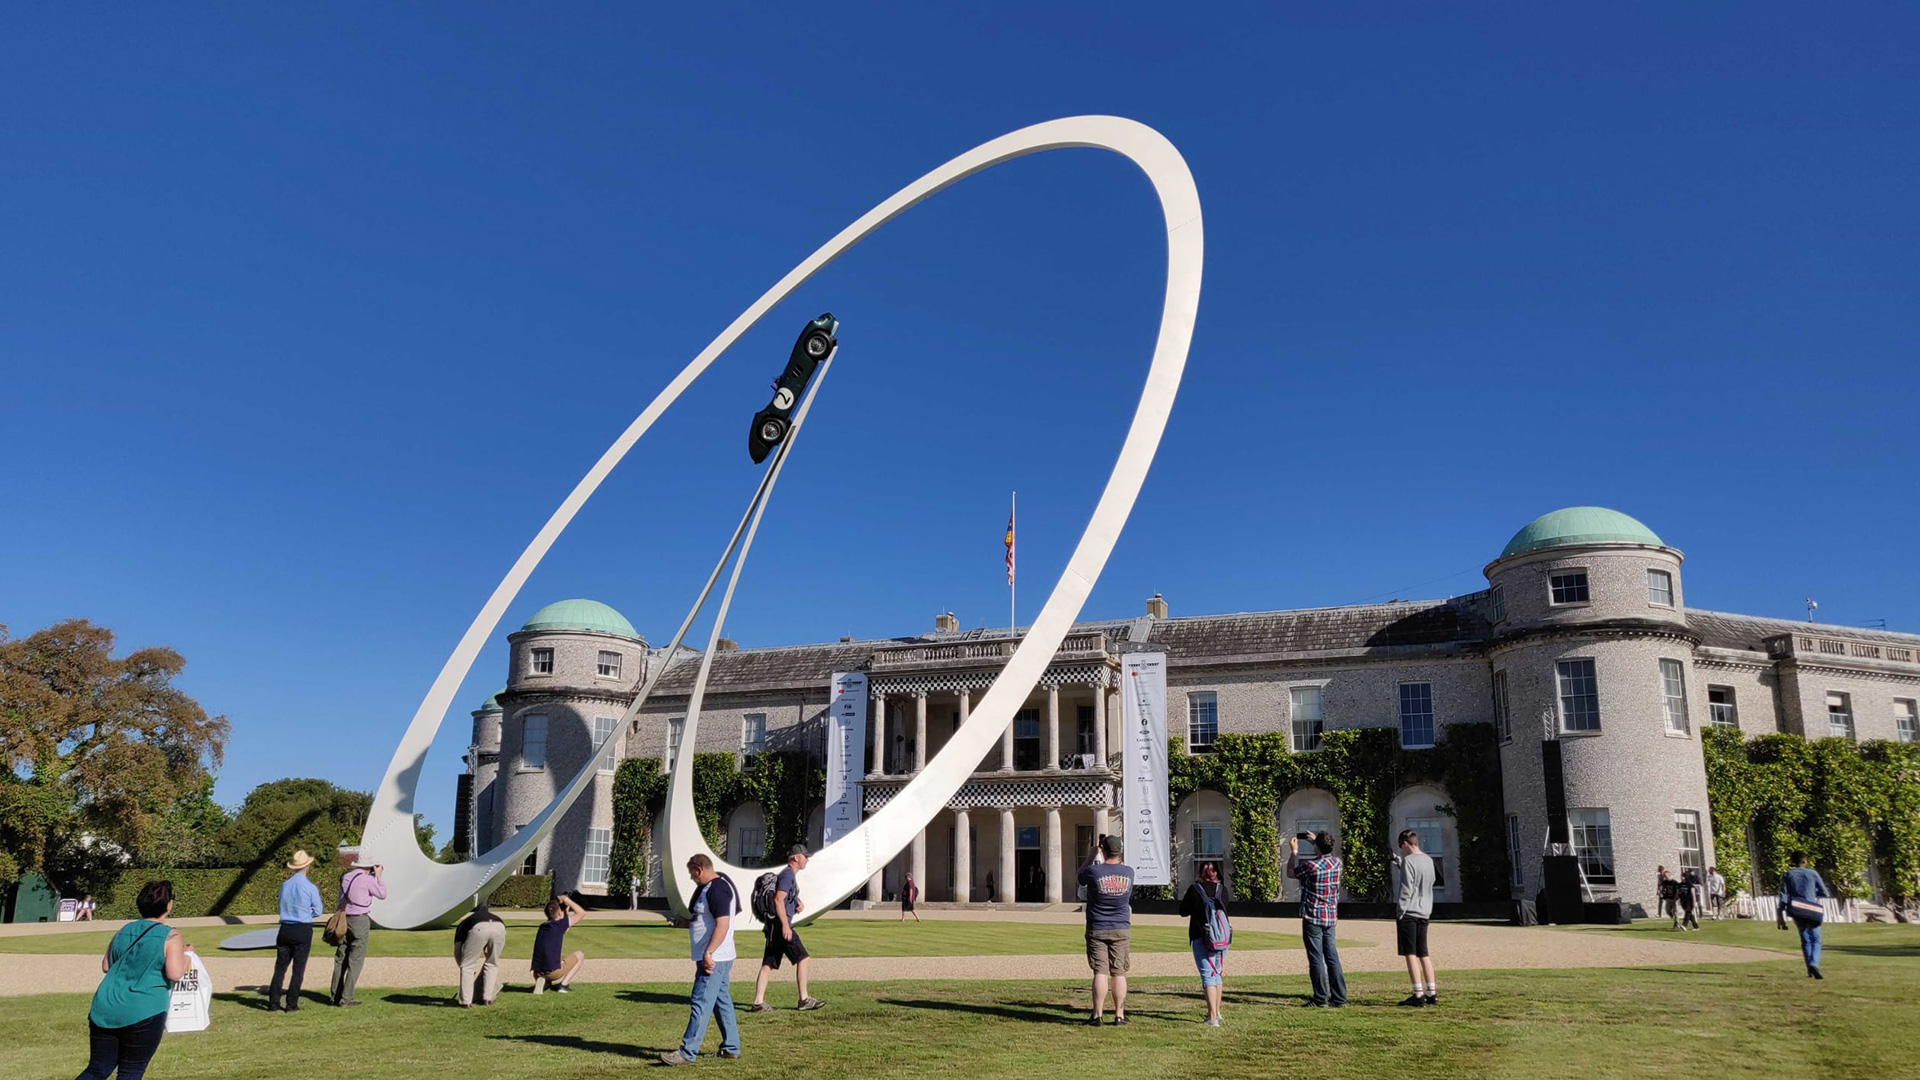 2020 Goodwood Festival of Speed postponed - Automotive Daily